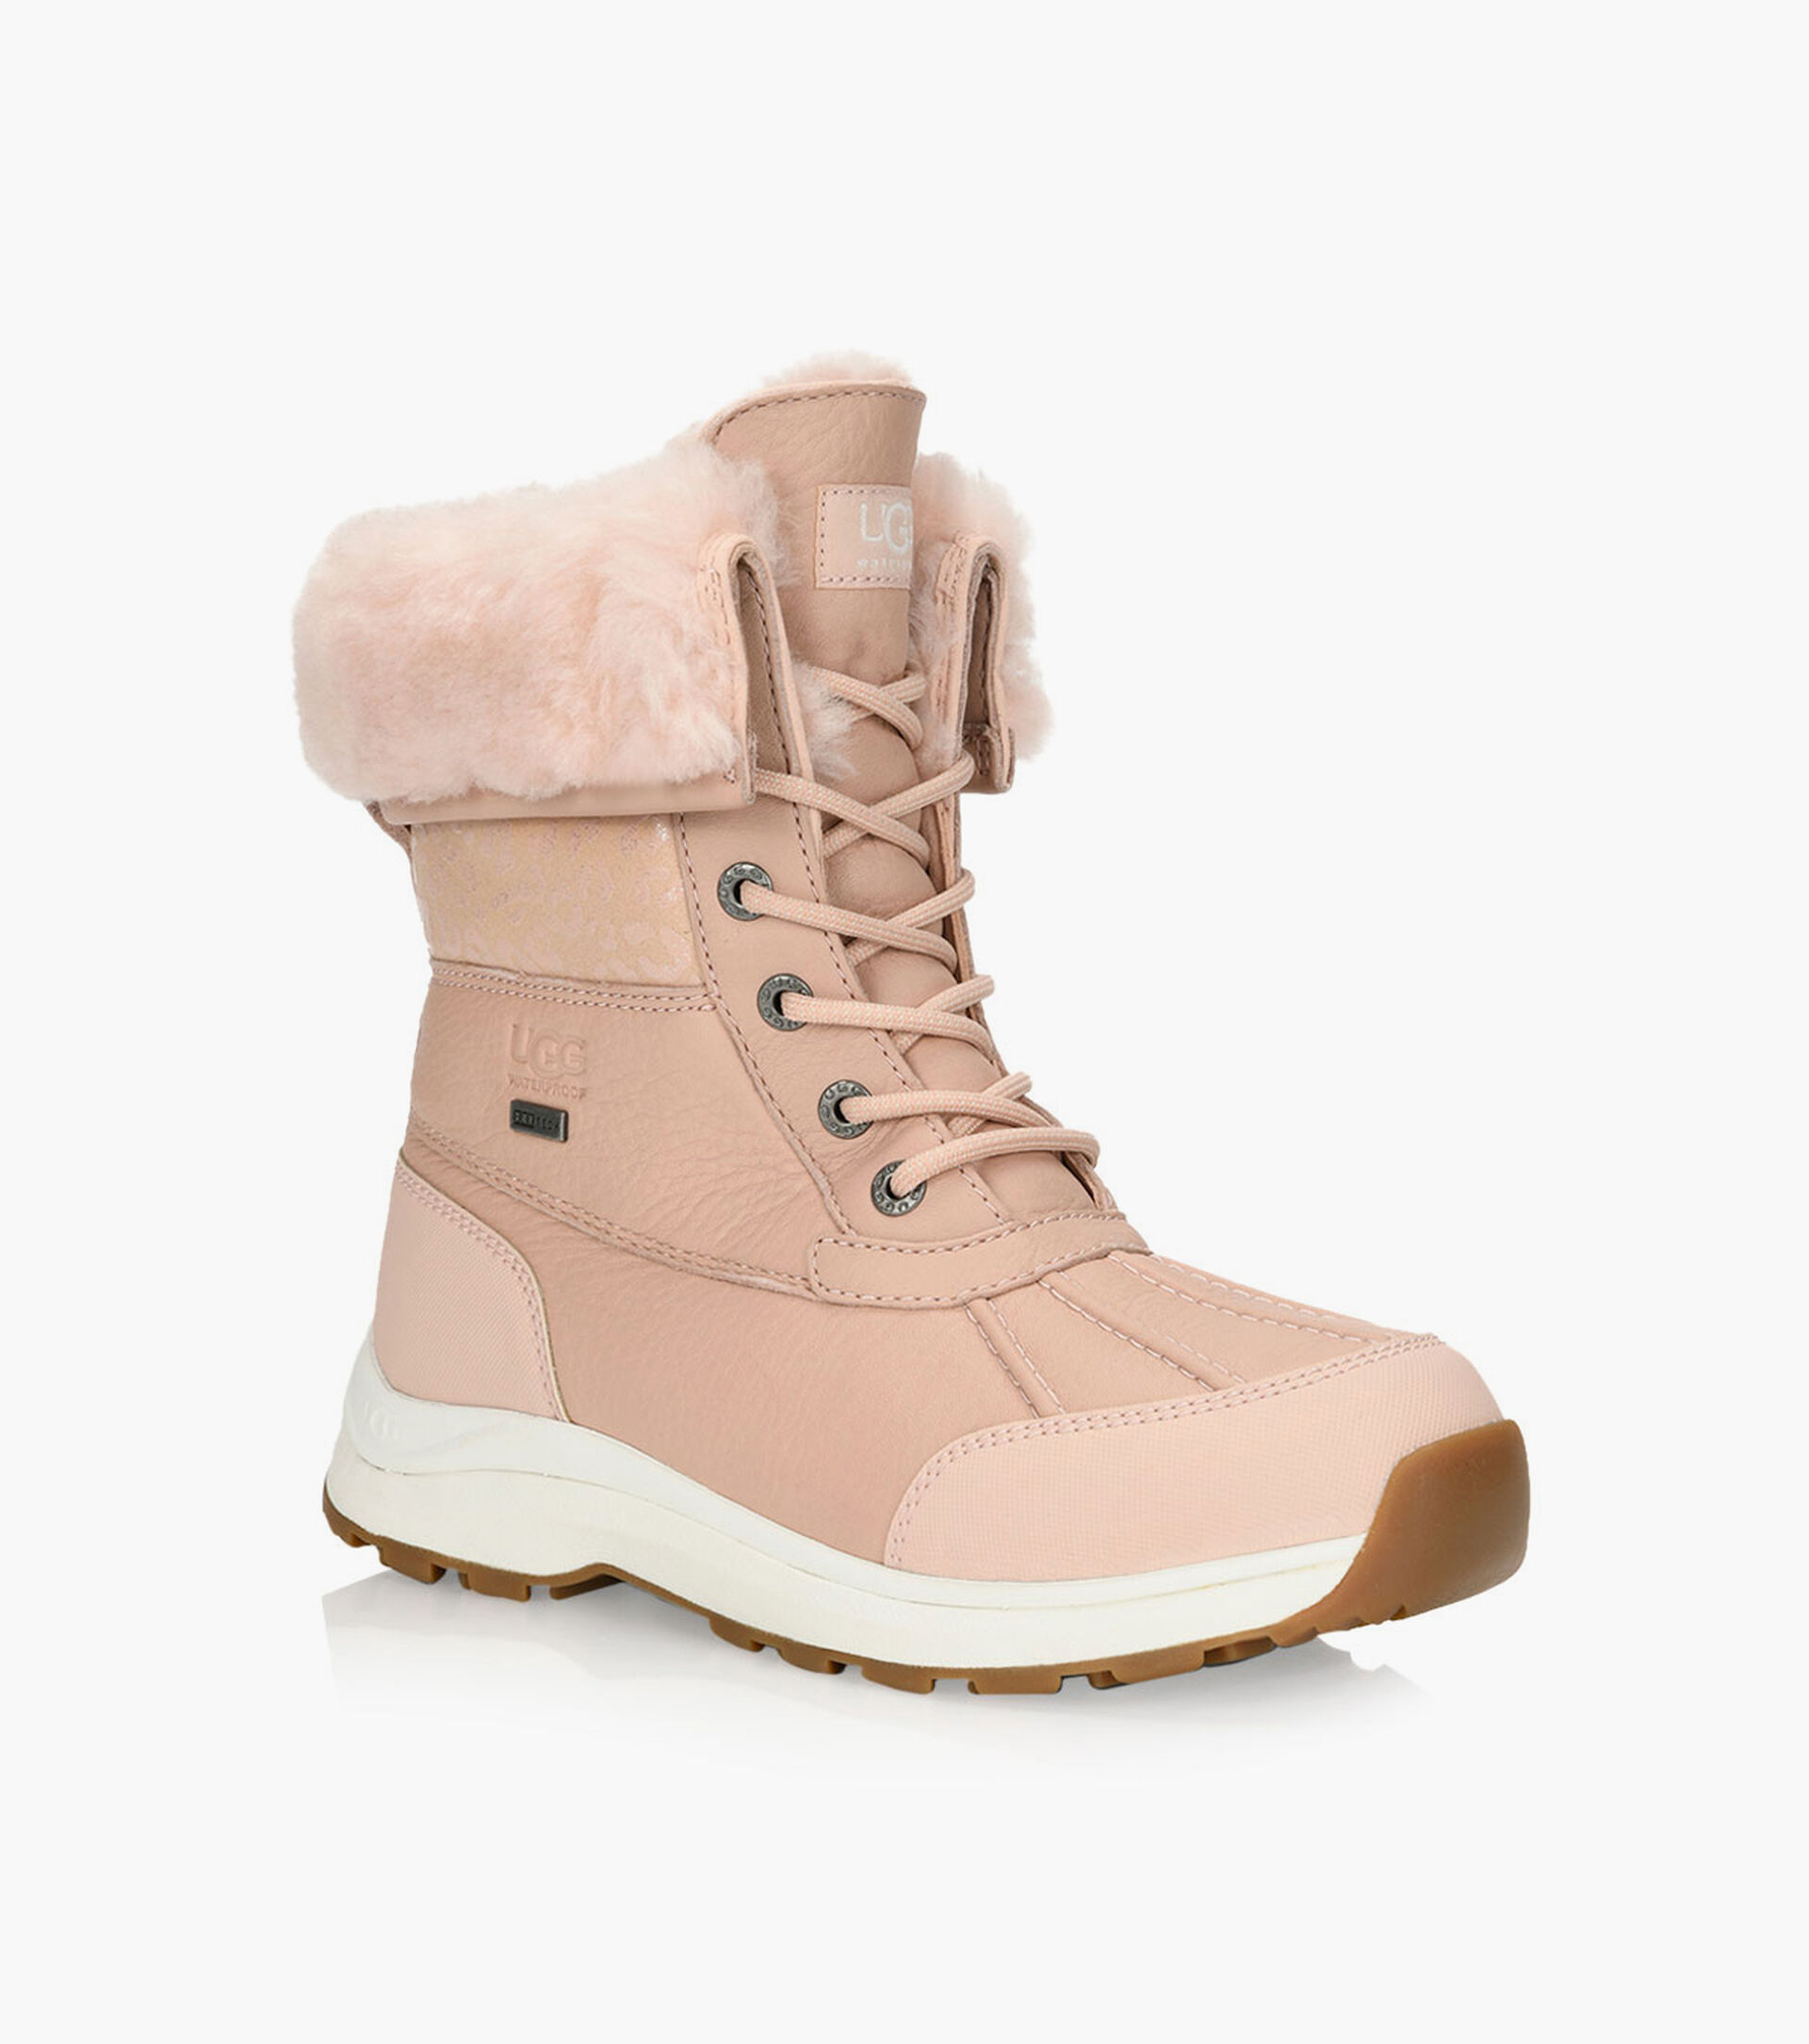 UGG ADIRONDACK III SNOW LEOPARD - Leather | Browns Shoes